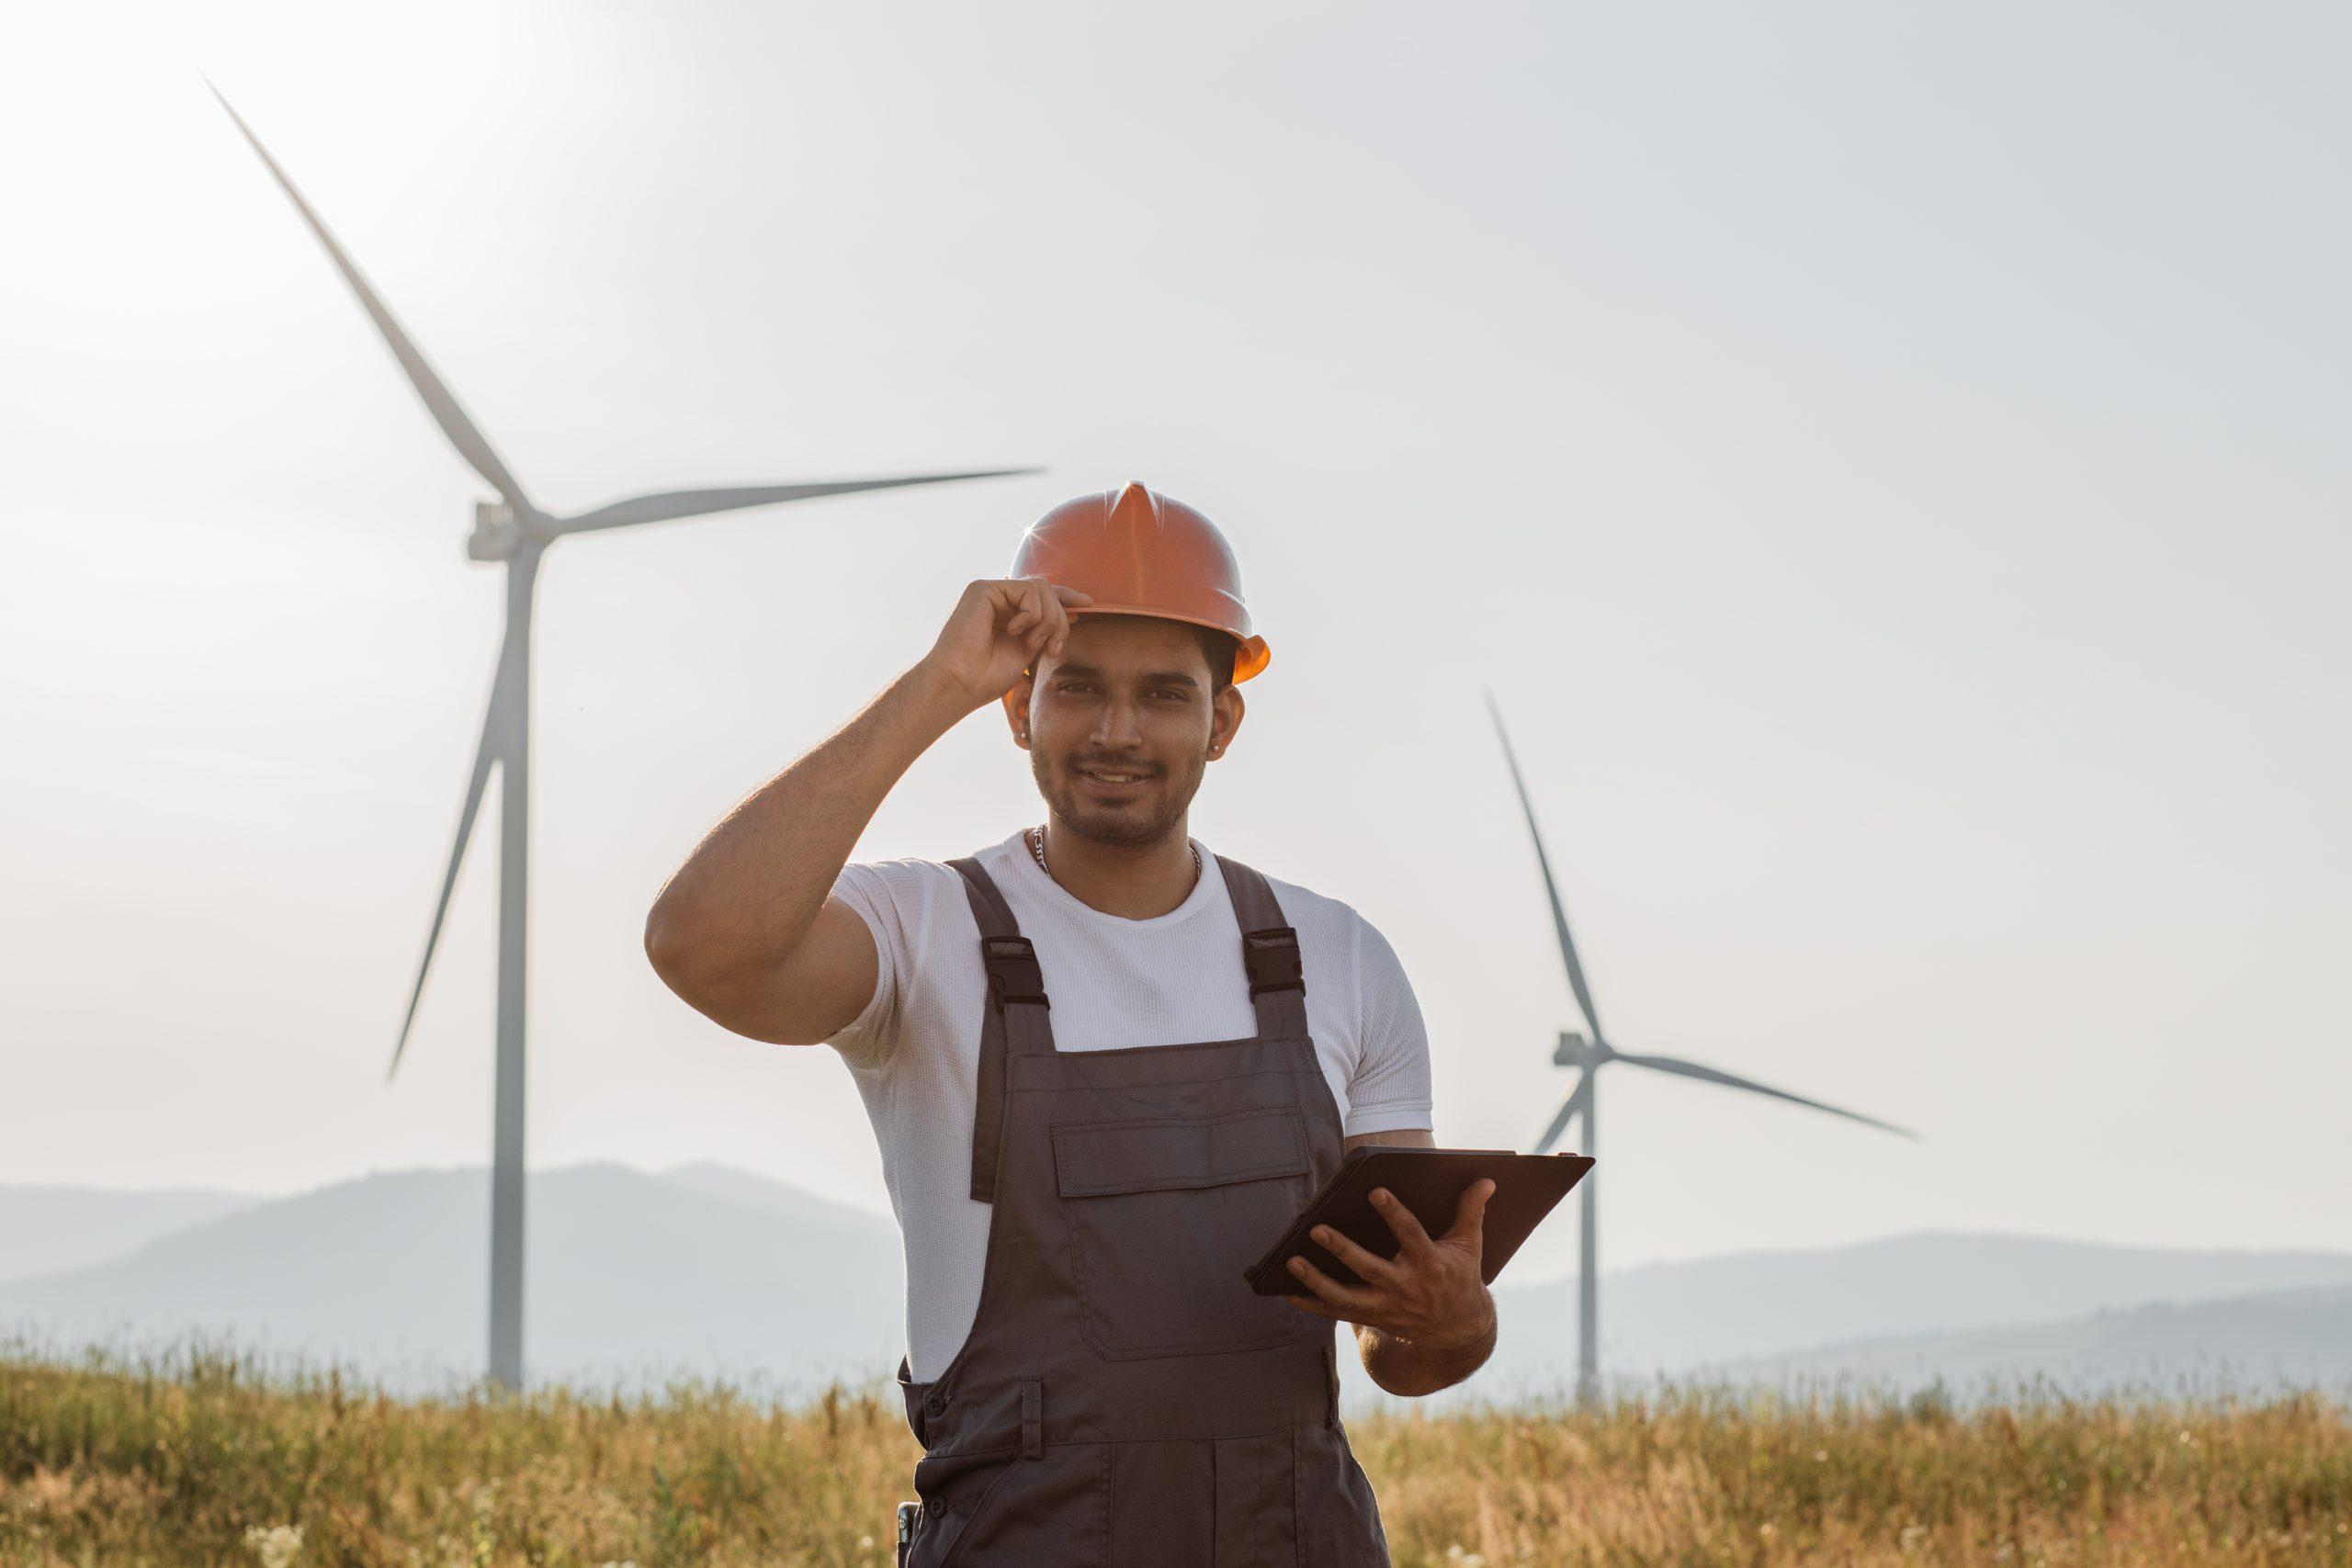 Professional technician in helmet and overalls smiling oj camera while standing on eco farm with wind turbines. Indian man using digital tablet while controlling process of clean energy making.